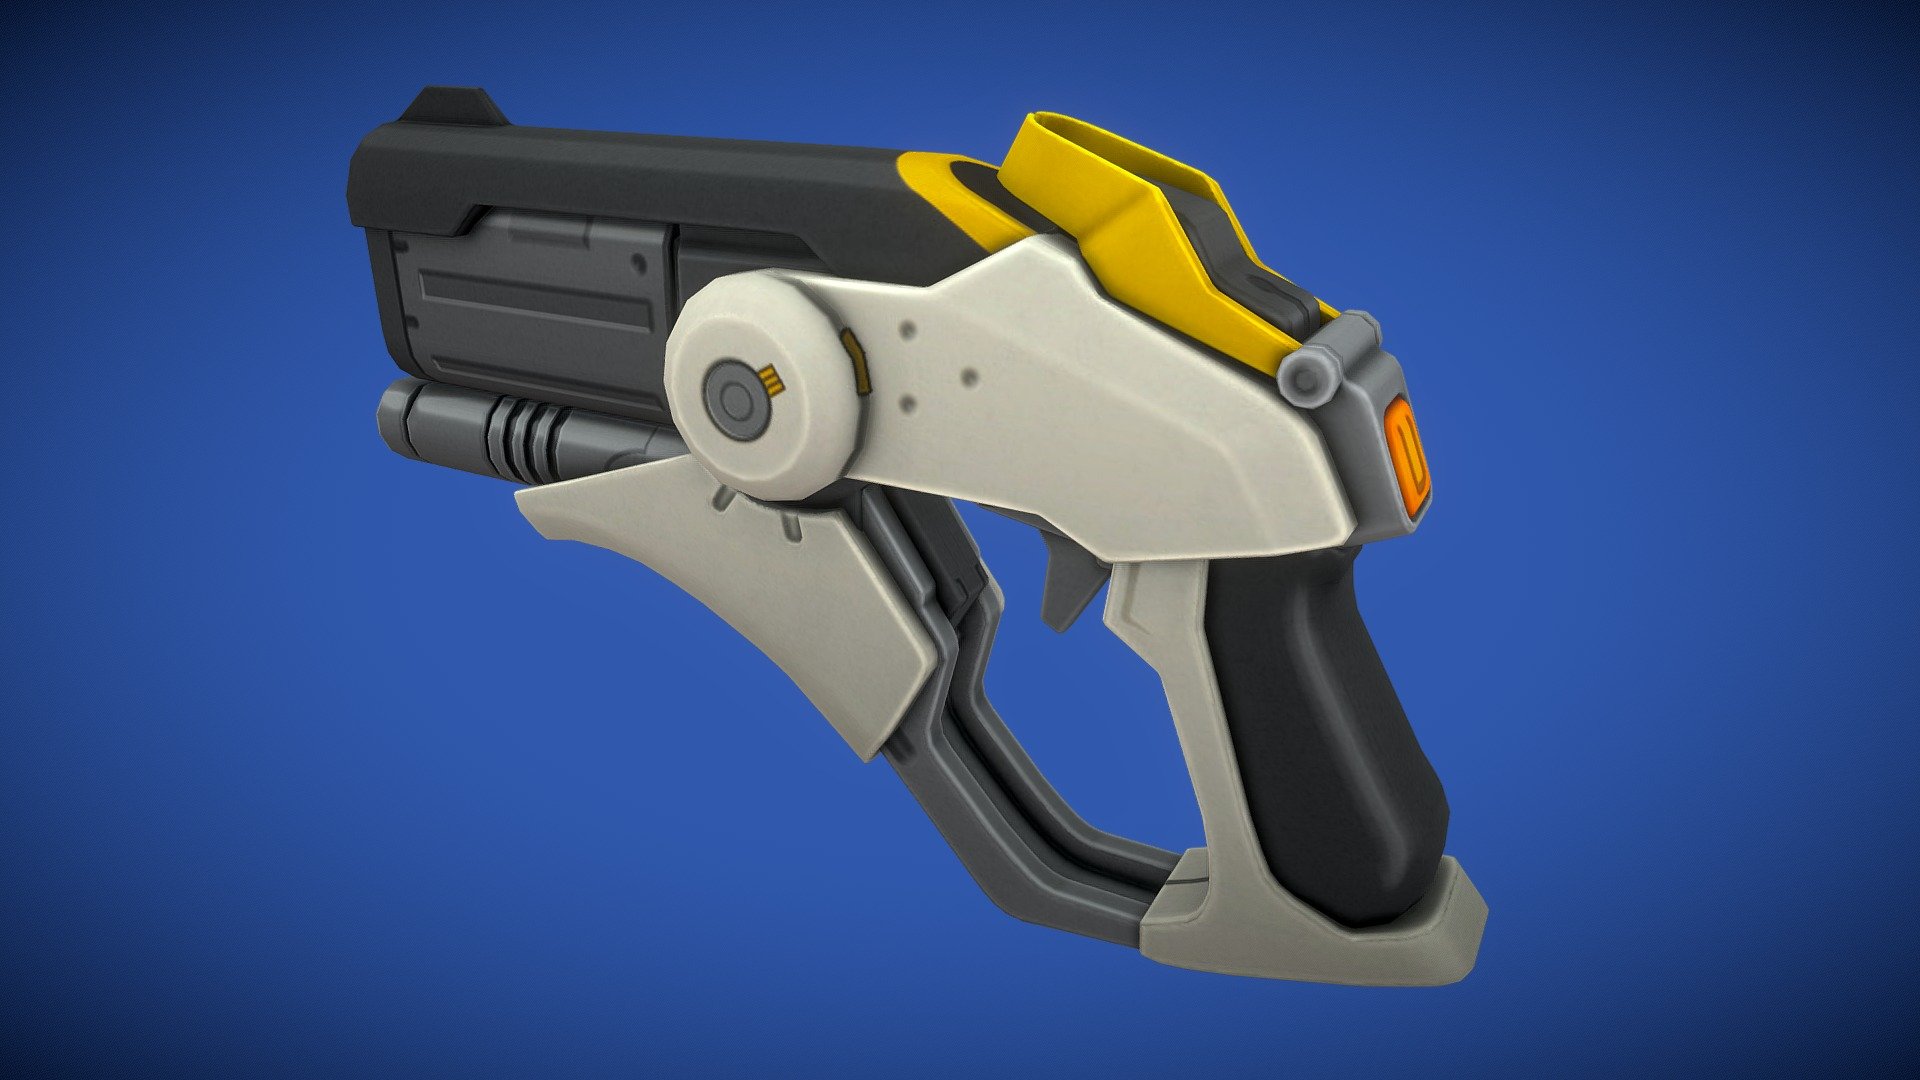 Stylised Overwatch Mercy blaster (Caduceus Blaster) Project for University.
Modelled in Maya 2019 Textured in Substance Painter, Diffuse only 3d model